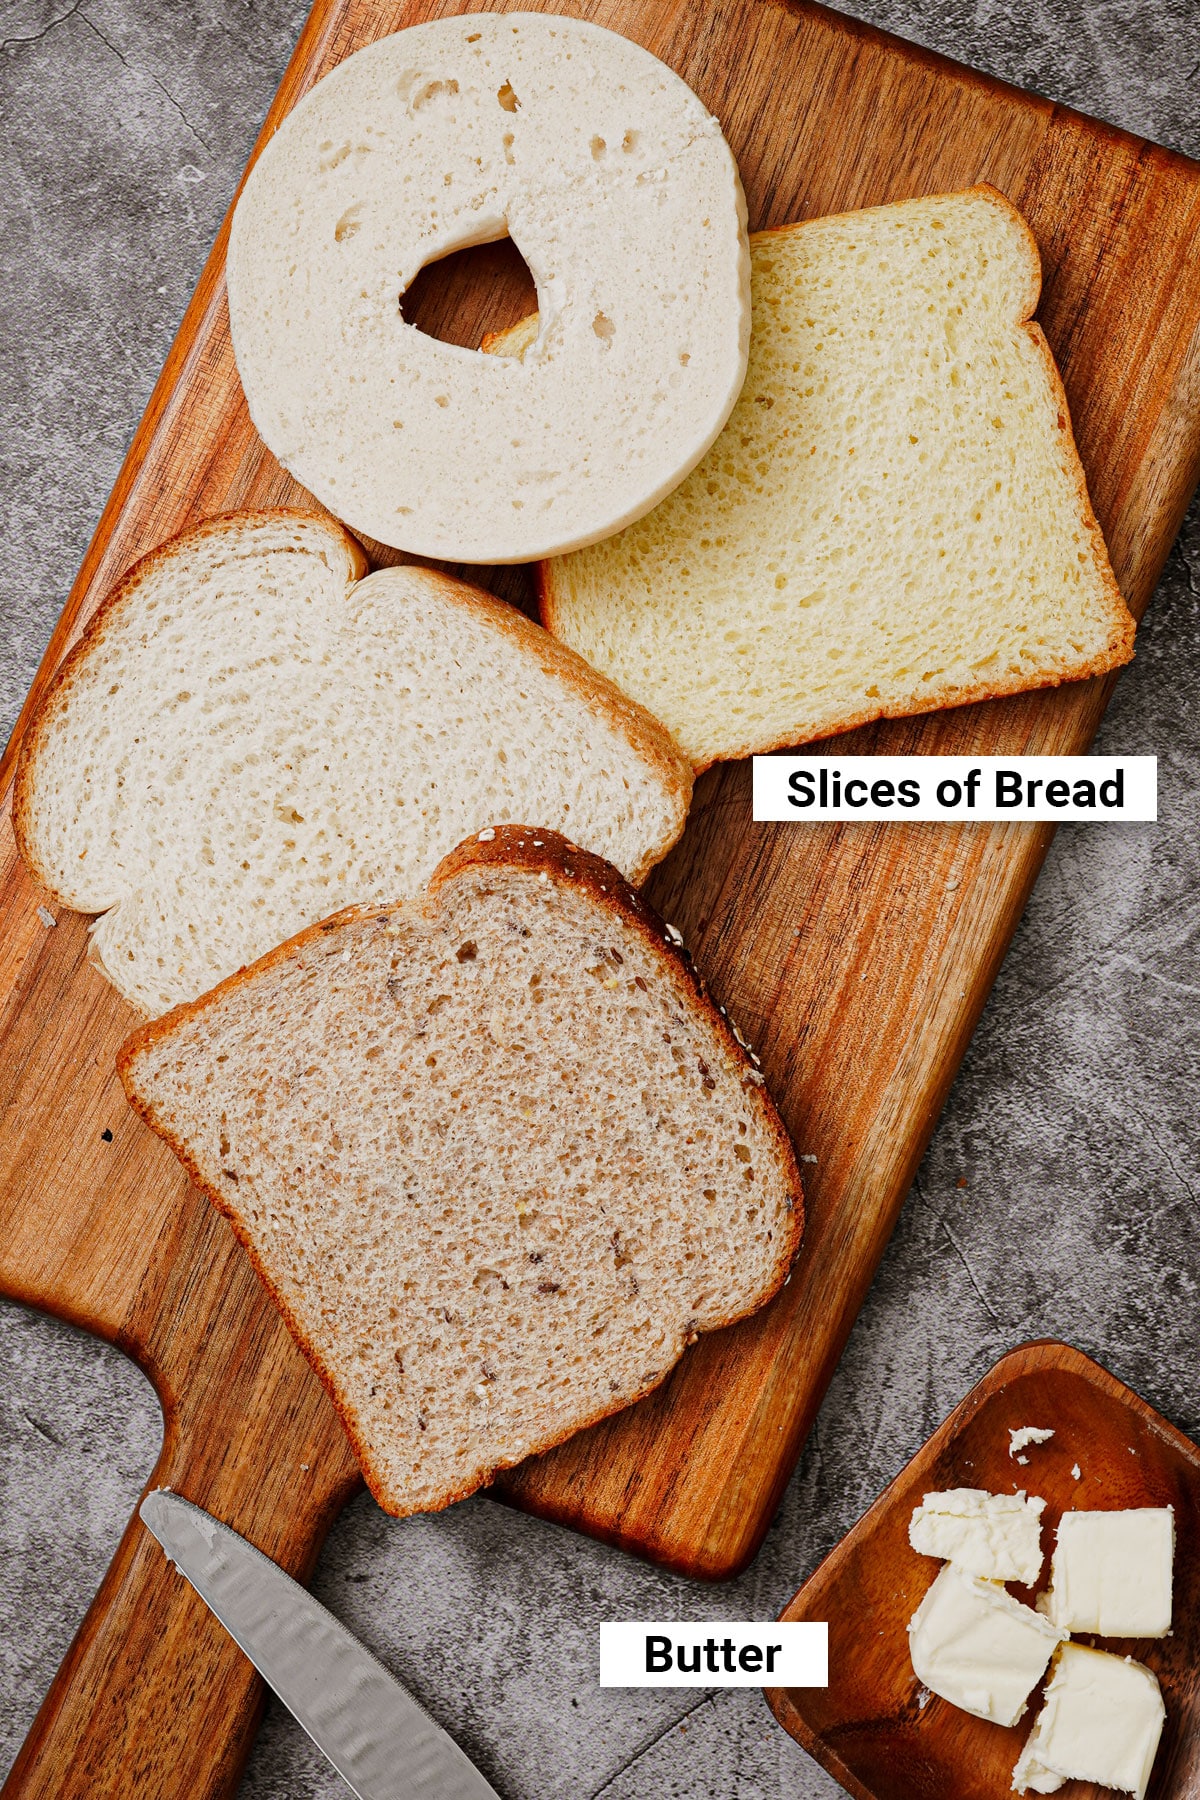 Different types of bread slices: plain bagel, brioche, white, whole wheat.